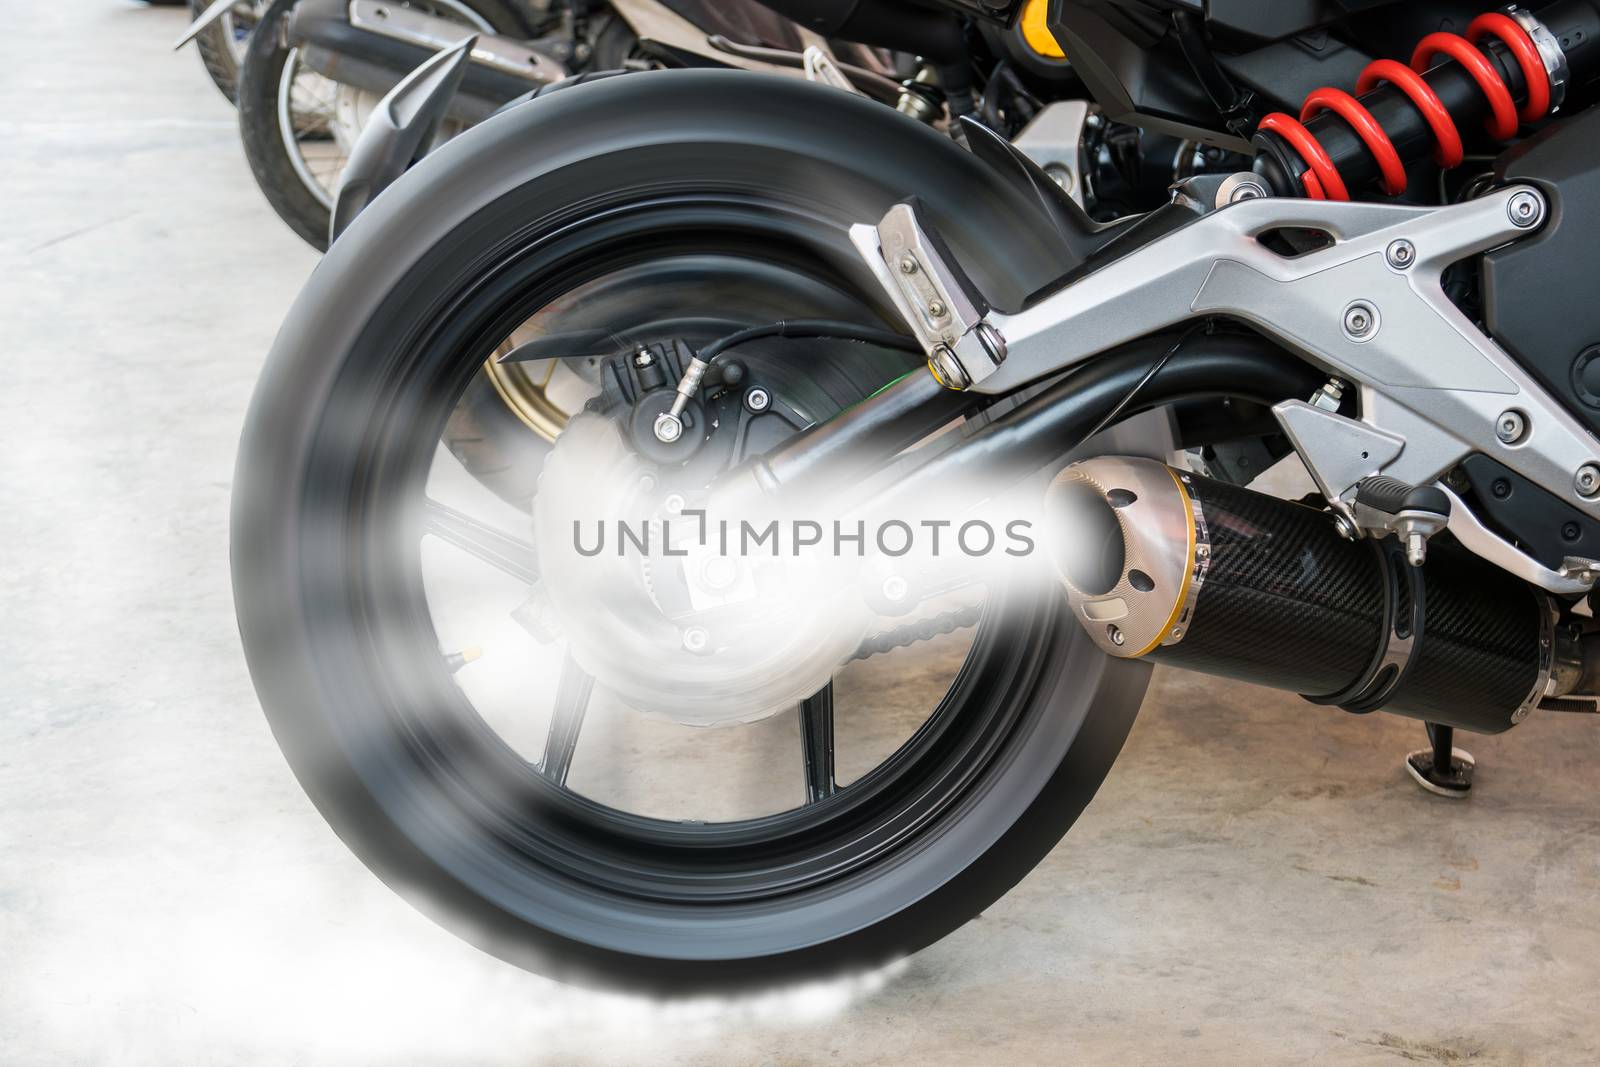 Test the rotation of the wheel and the burning of a motorcycle tire.